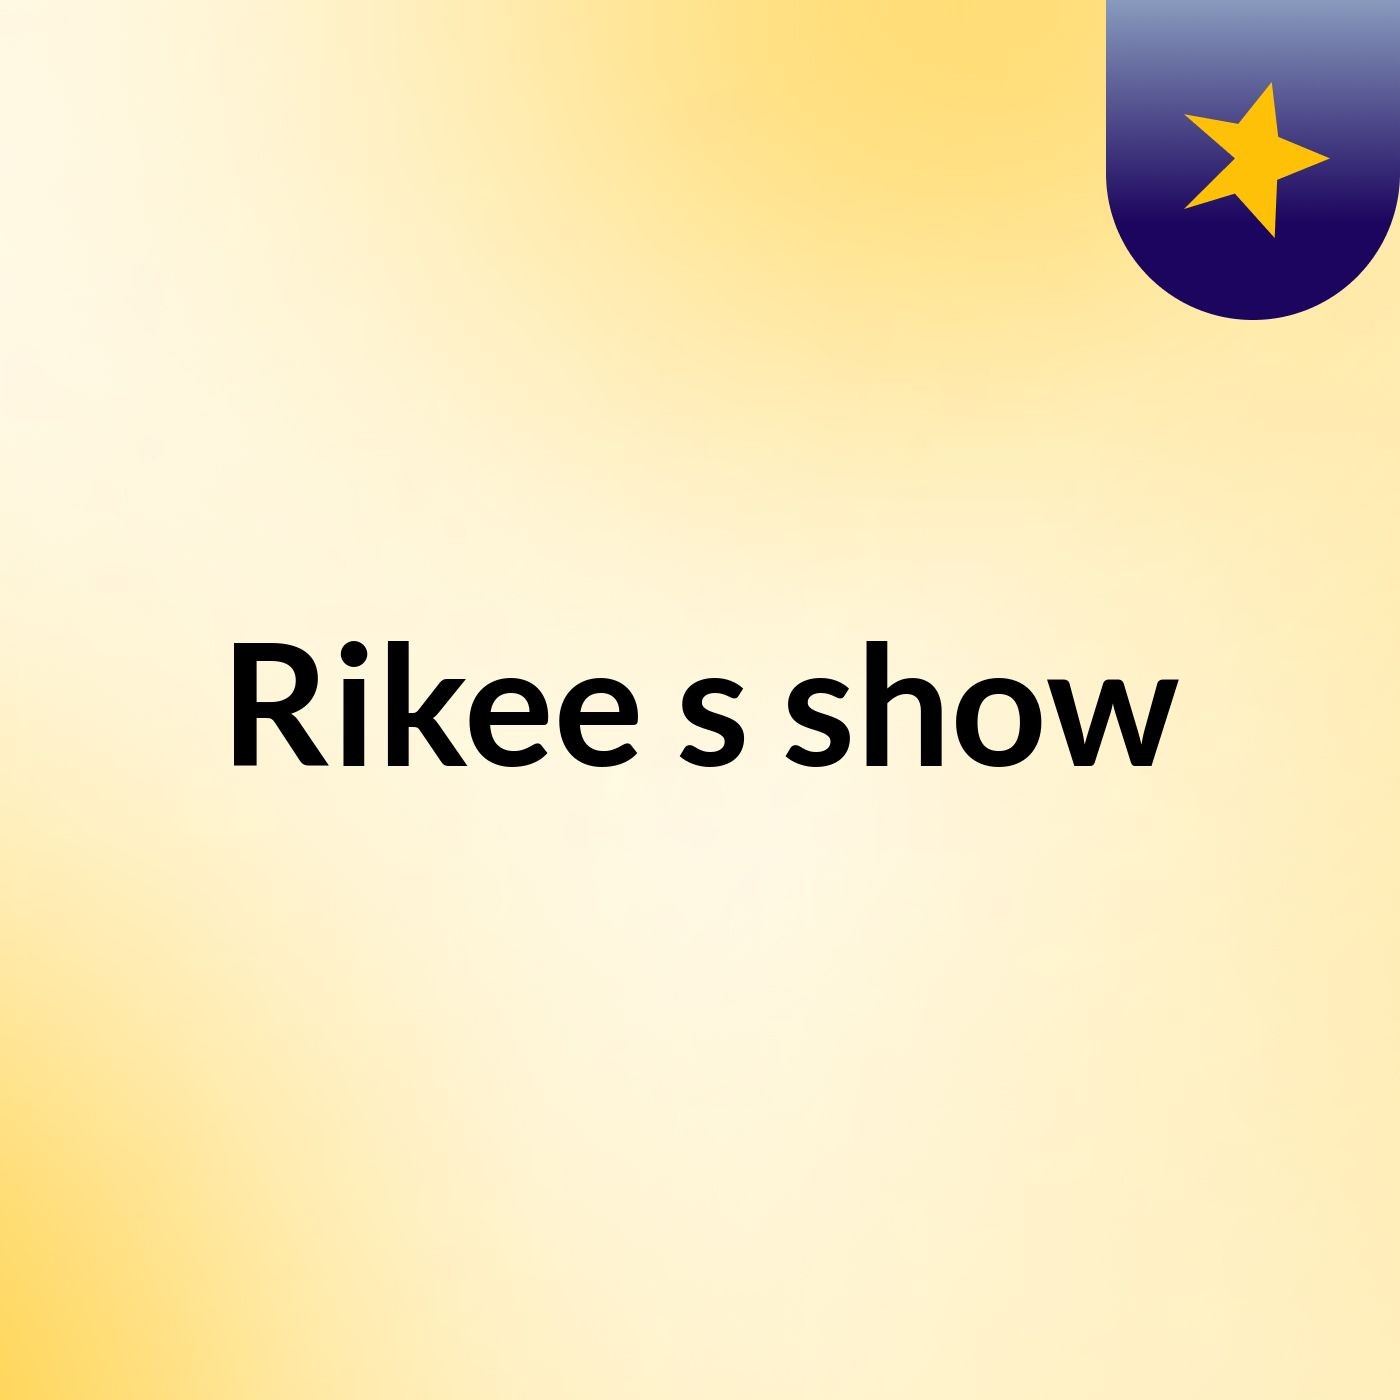 Rikee's show